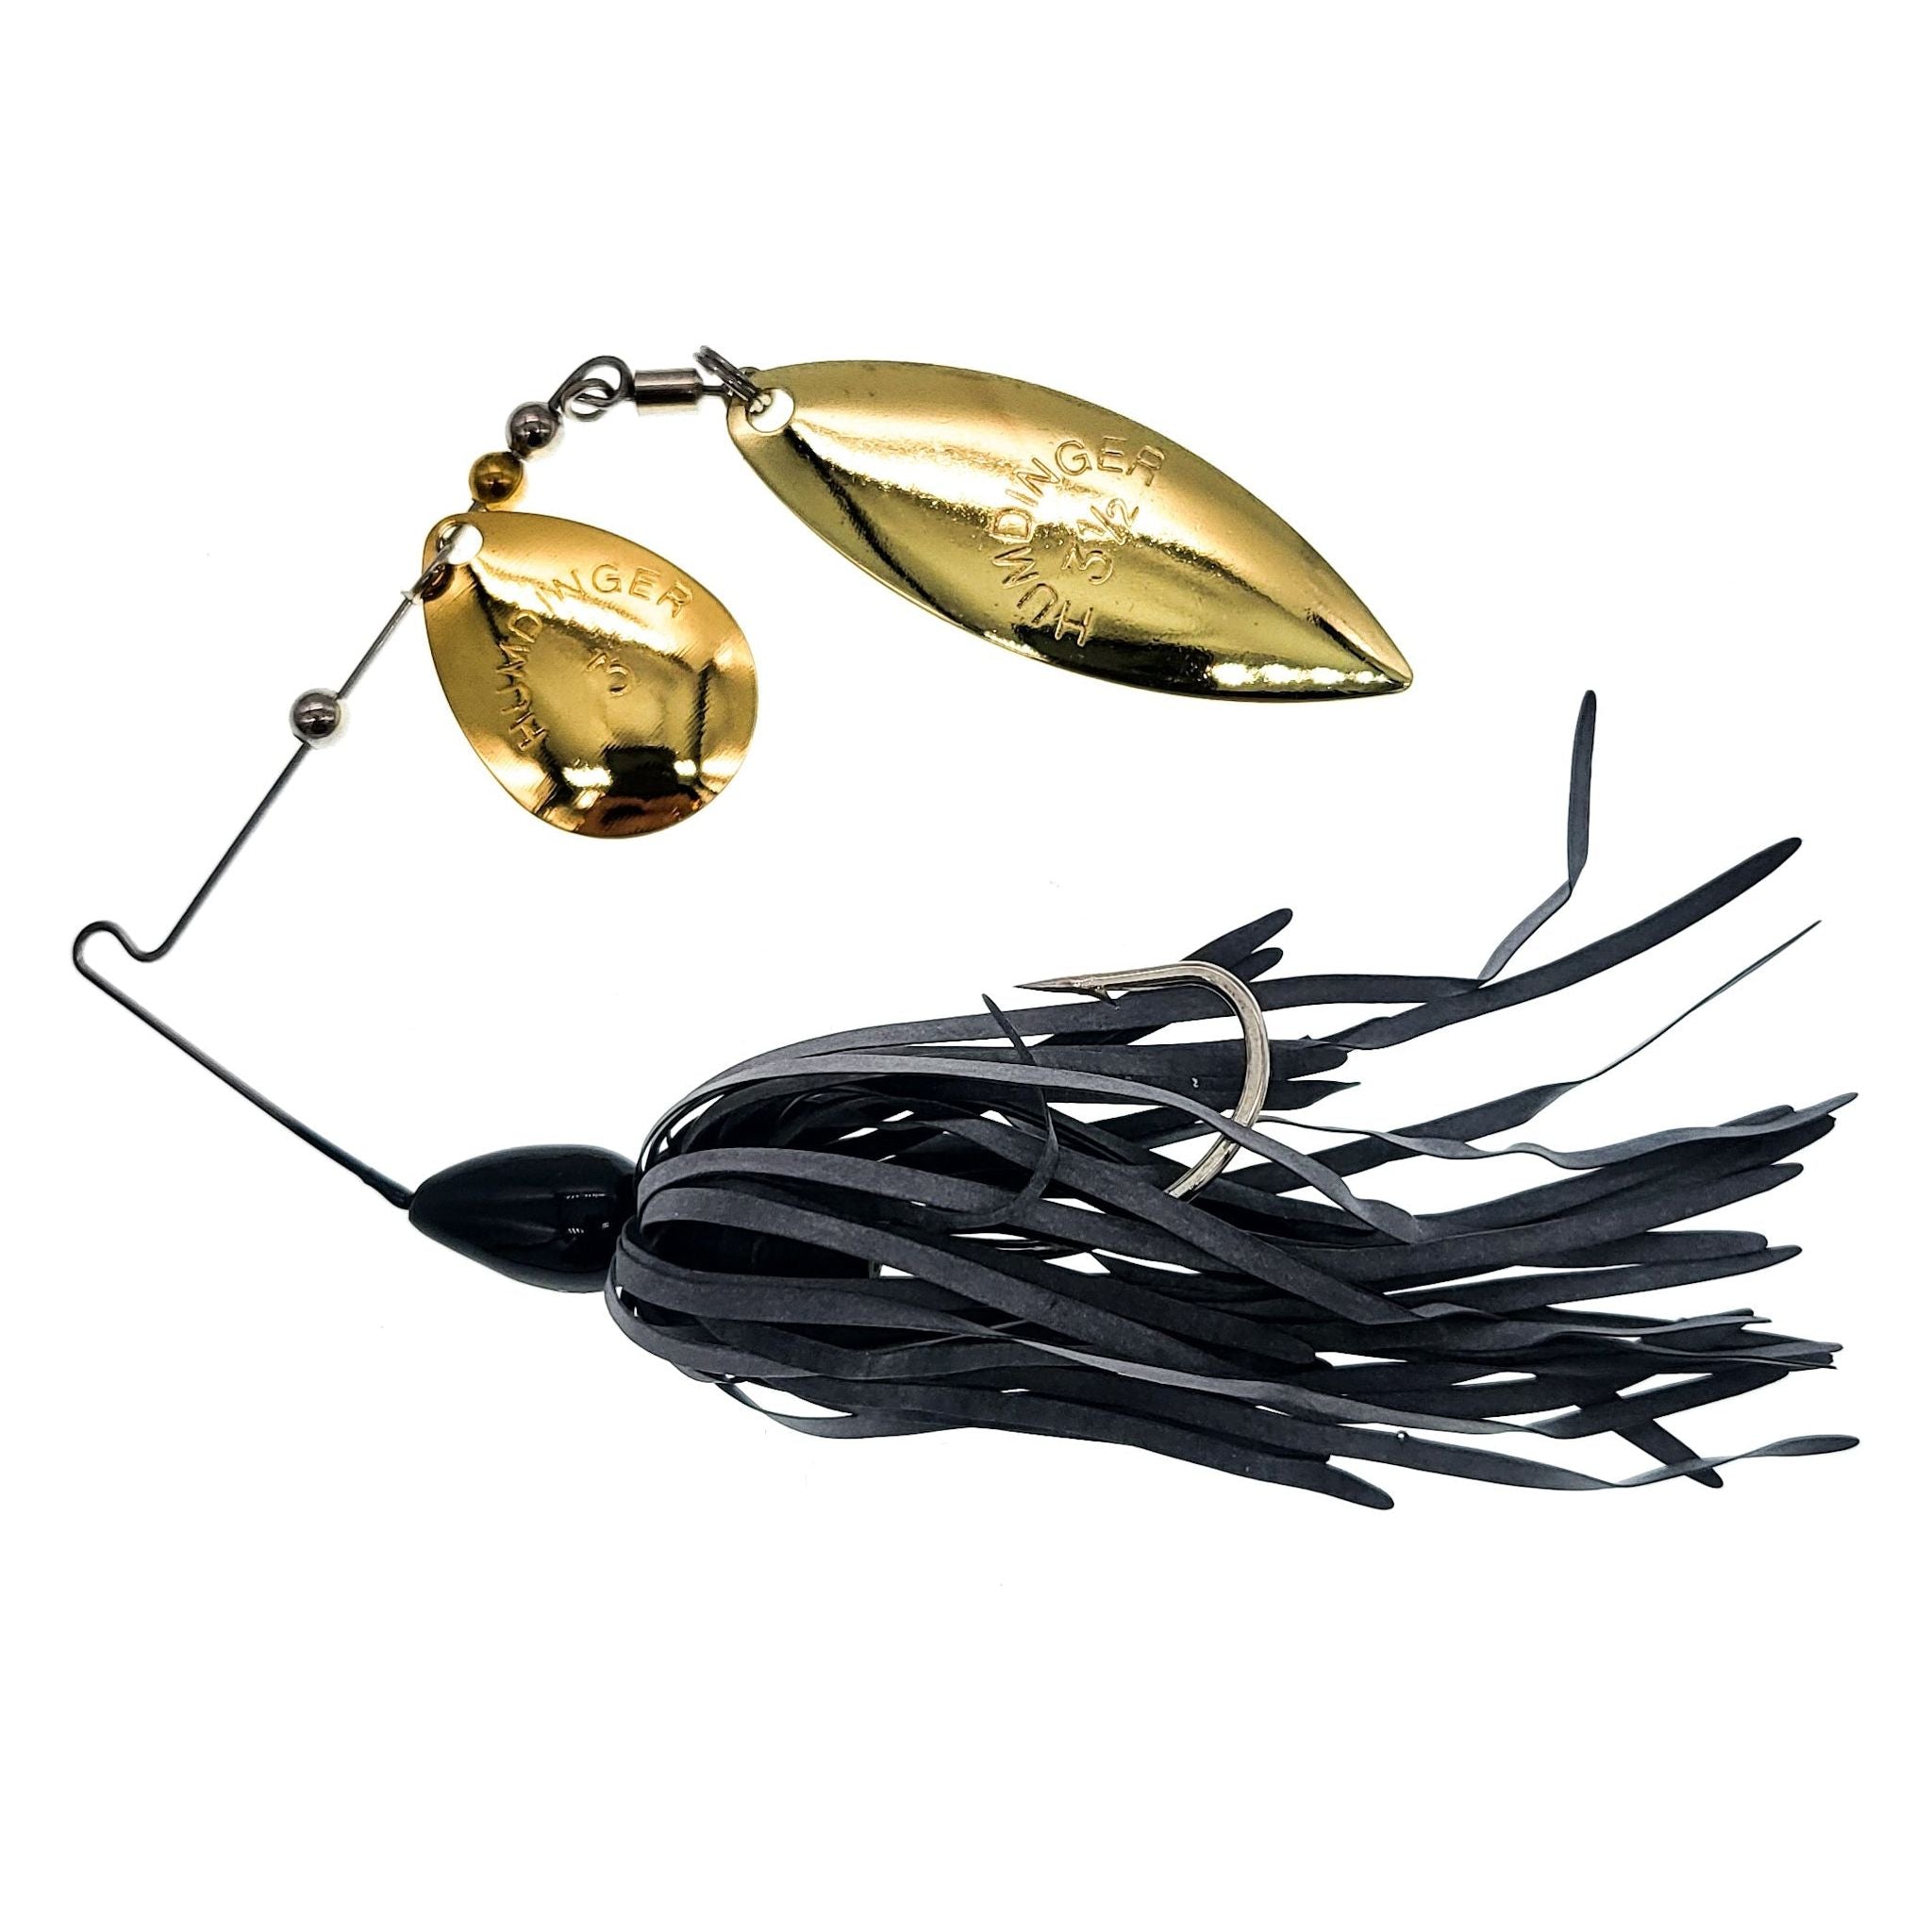 Persuader Spinnerbait Double Willow Blade - FishAndSave